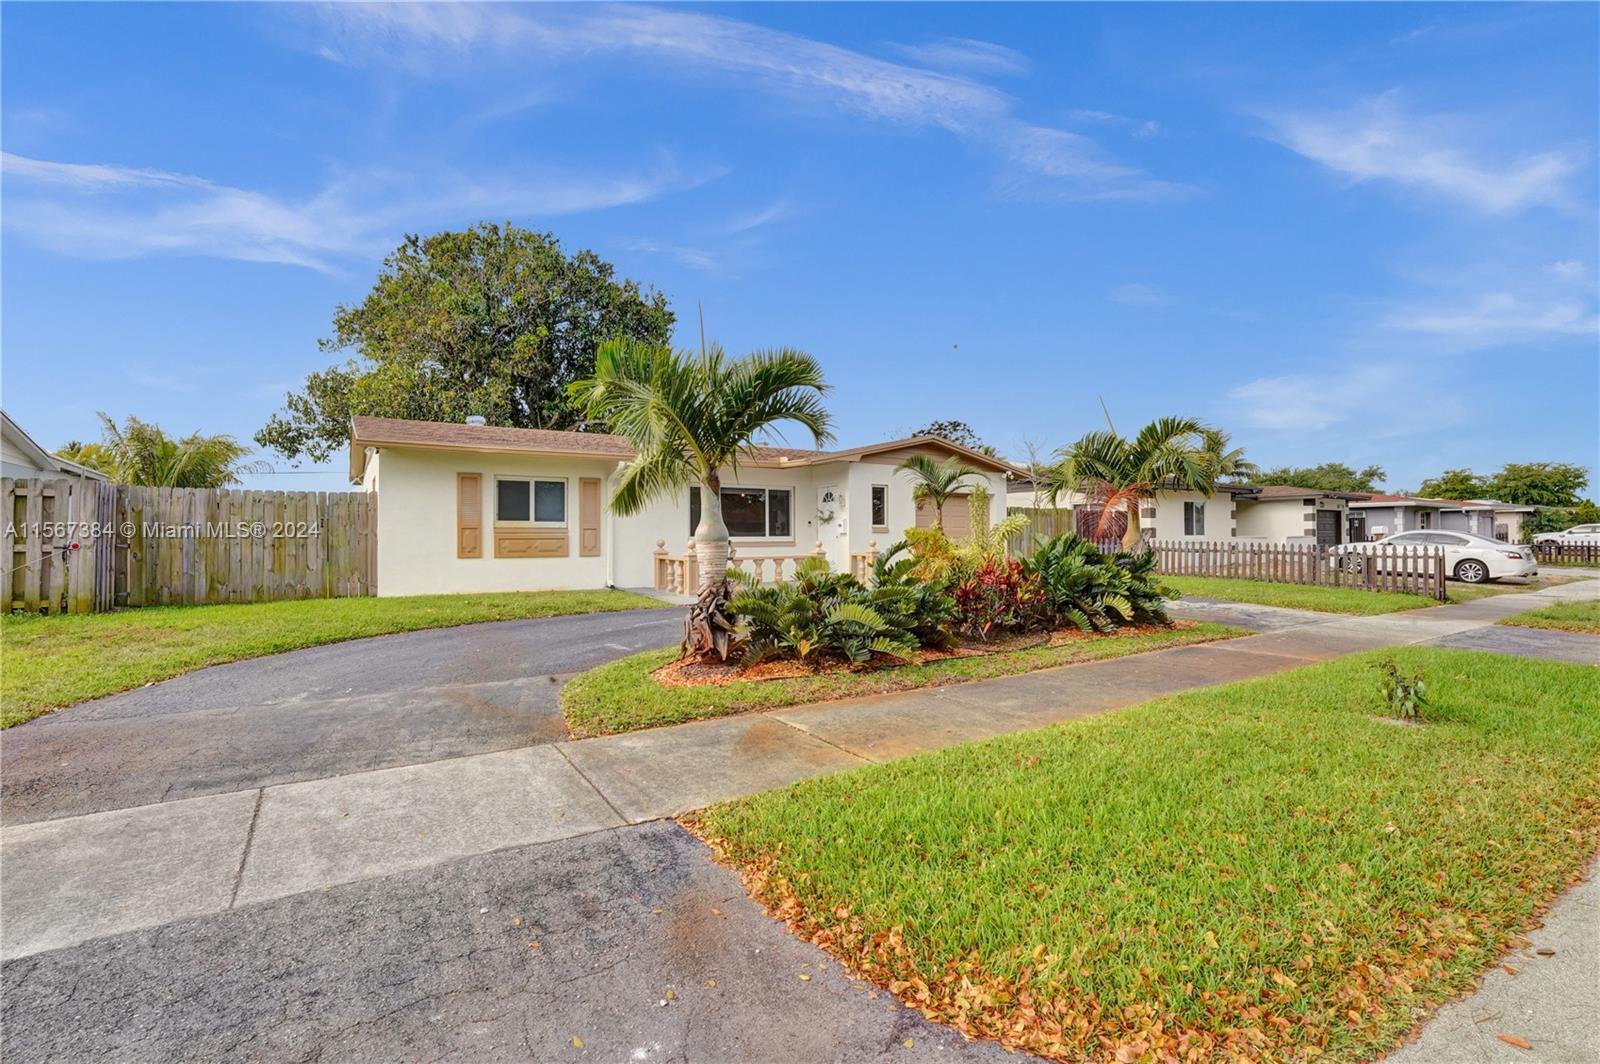 Photo of 7304 Mckinley St in Hollywood, FL